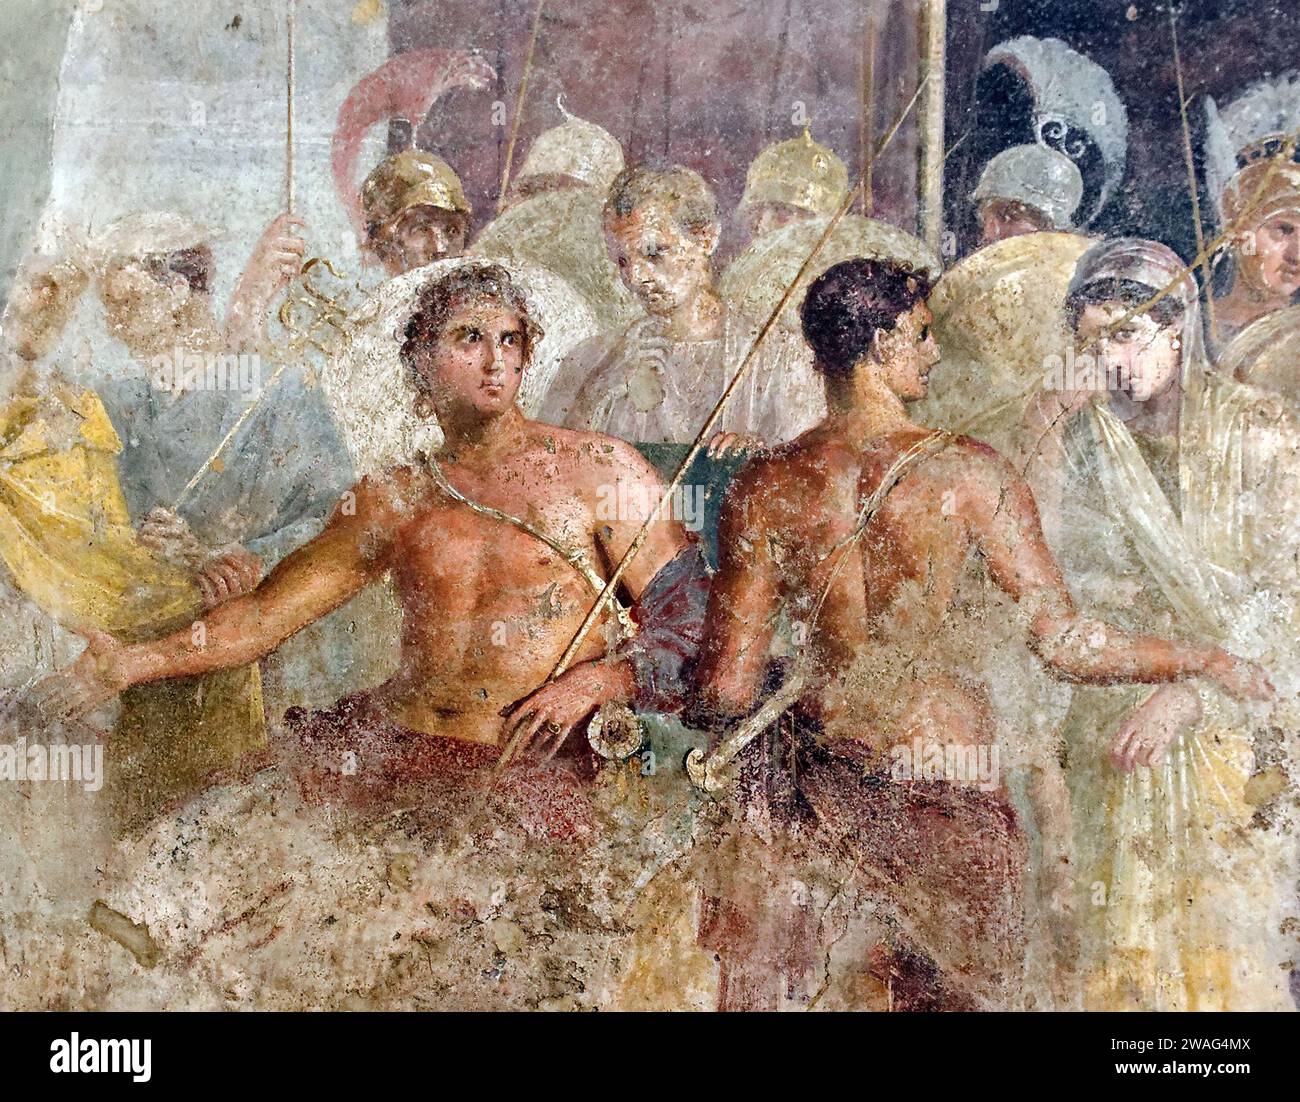 Agamemnon. Achilles' surrender of Briseis to Agamemnon, from the House of the Tragic Poet in Pompeii, Italy, fresco, 1st century AD. In Greek mythology, Agamemnon was a king of Mycenae who commanded the Greeks during the Trojan War. Stock Photo